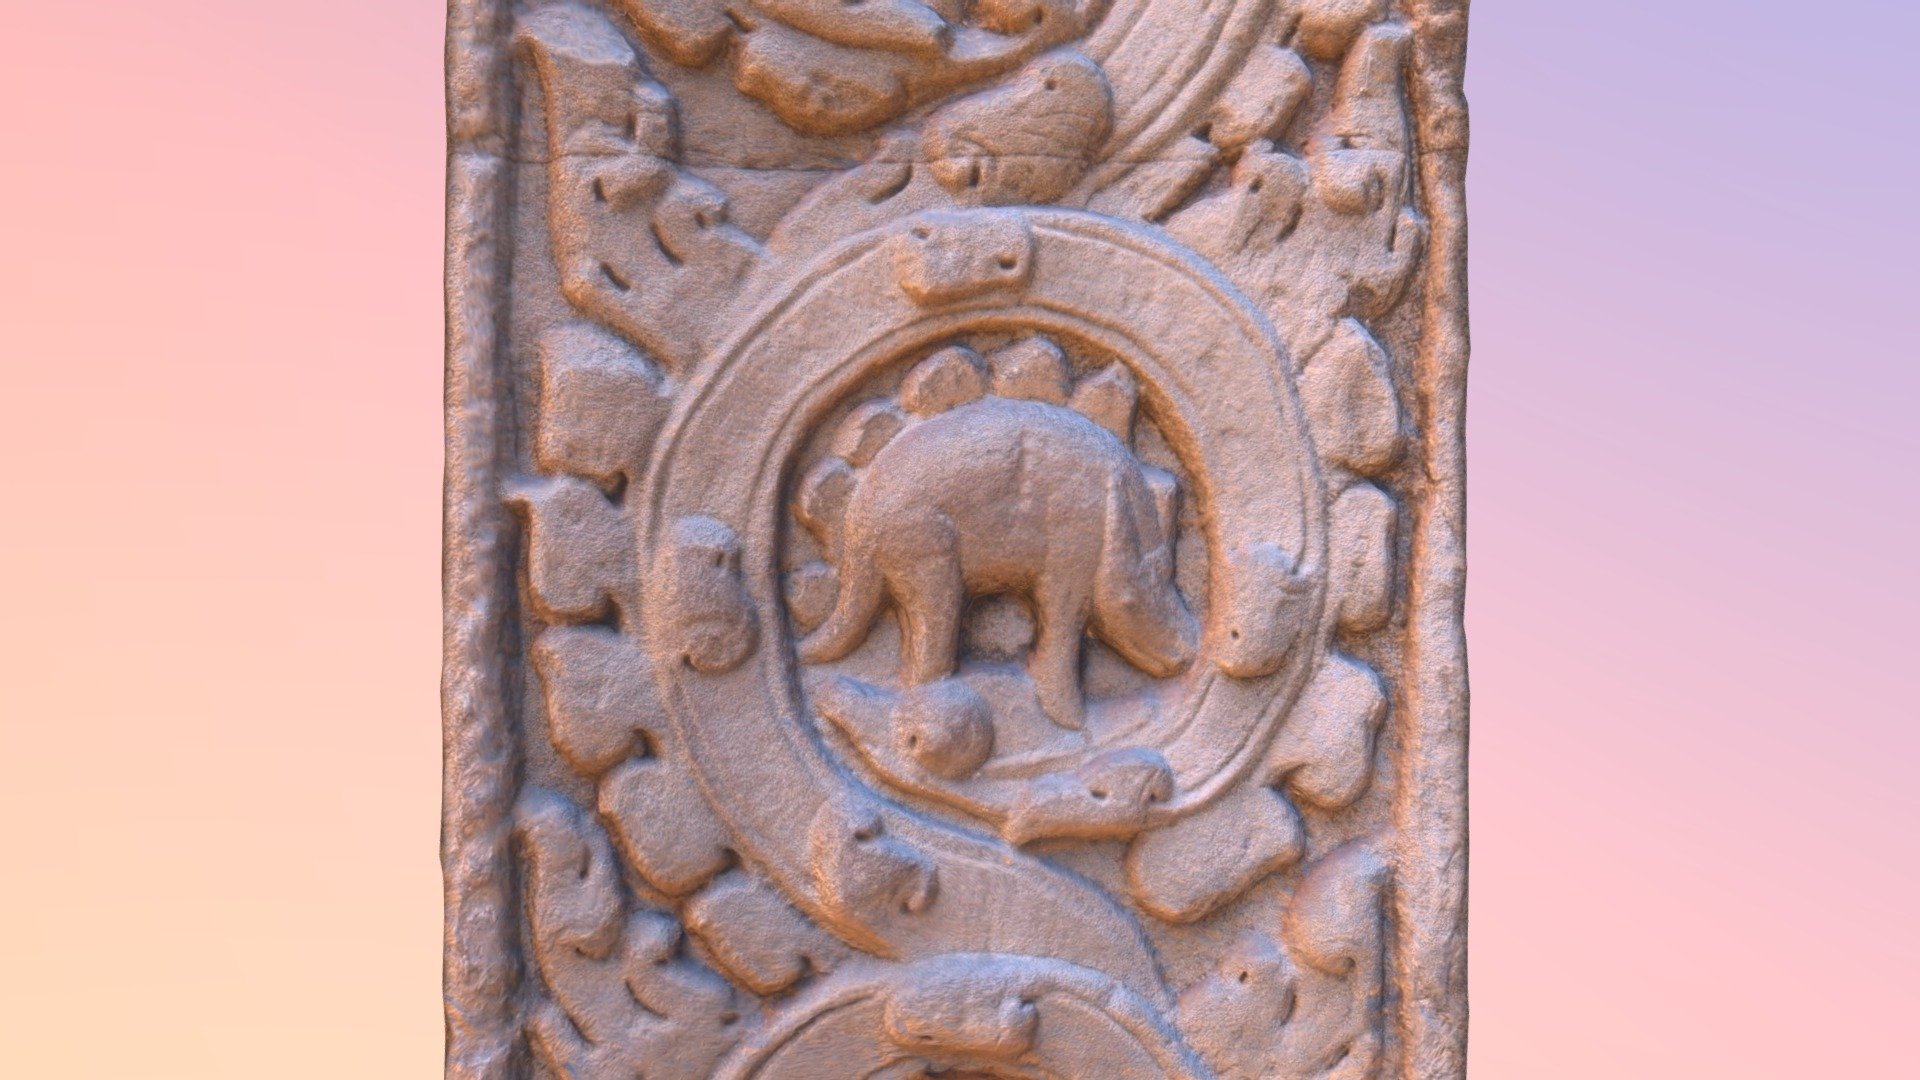 This is a carving found in the Ta Prohm temple in Cambodia that bears a striking resemblance to a Stegosaurus type dinosaur.  Ta Prohm temple was built about the late 12th and early 13th centuries (1186) by King Jayavarman VII.

This naturally brings up the question, &ldquo;How would an artist only a thousand years ago know what a stegosaurus looked like, unless he had seen one alive or was told what it looked like by someone else who had seen one alive?